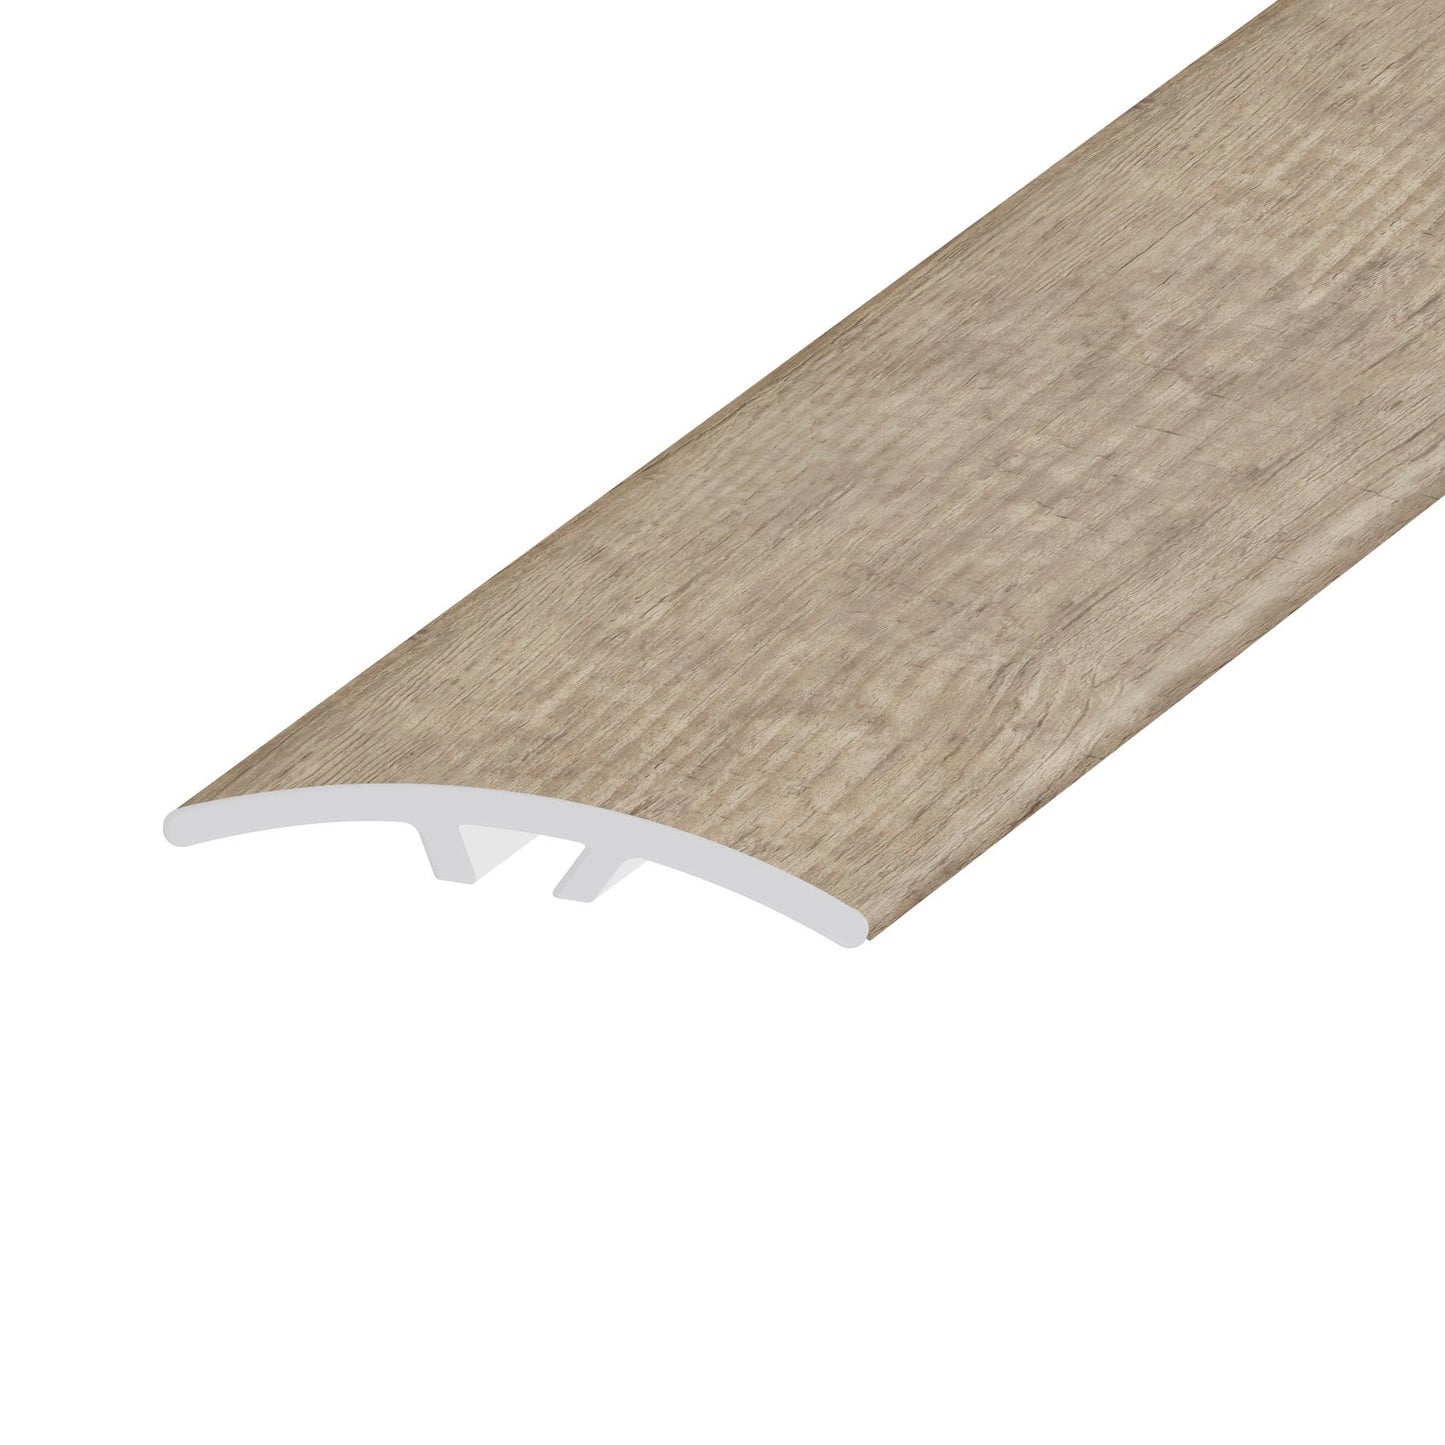 Natural Burlap 0.23 in. Thich x 1.59 in. Width x 94 in. Length Multi-Purpose Reducer Vinyl Molding